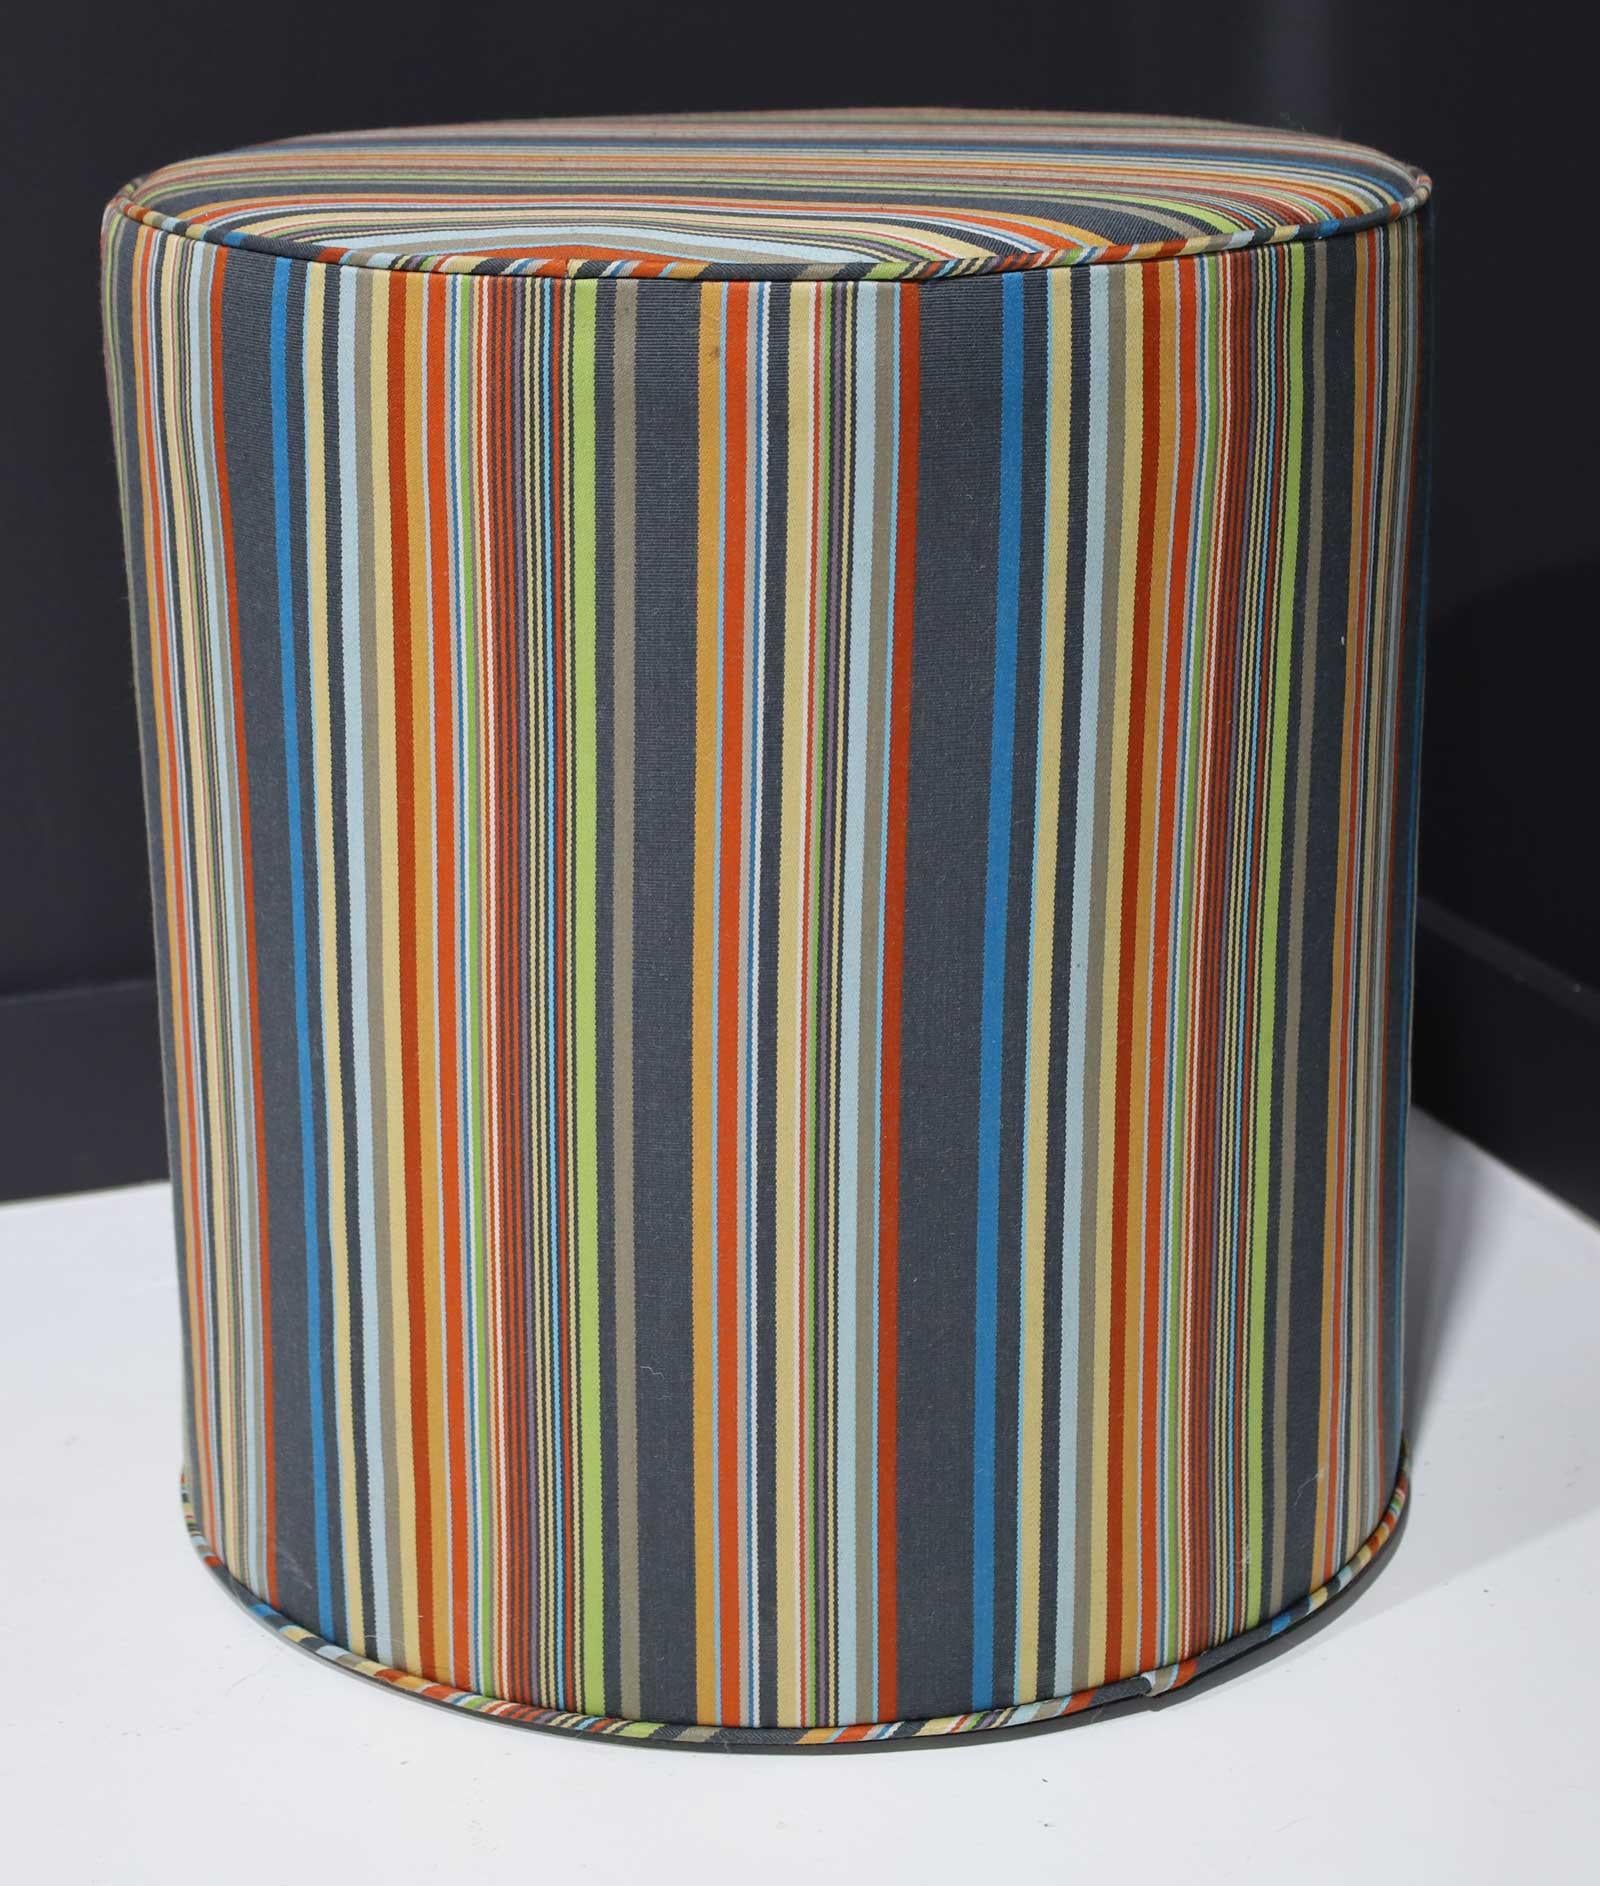 We can make as many as you need and upholster in any fabric of your choice. Here are a few examples we upholstered in a Paul Smith stripe and fabrics by Kelly Wearstler. A great stool for added seating anywhere or use at the table or a desk.